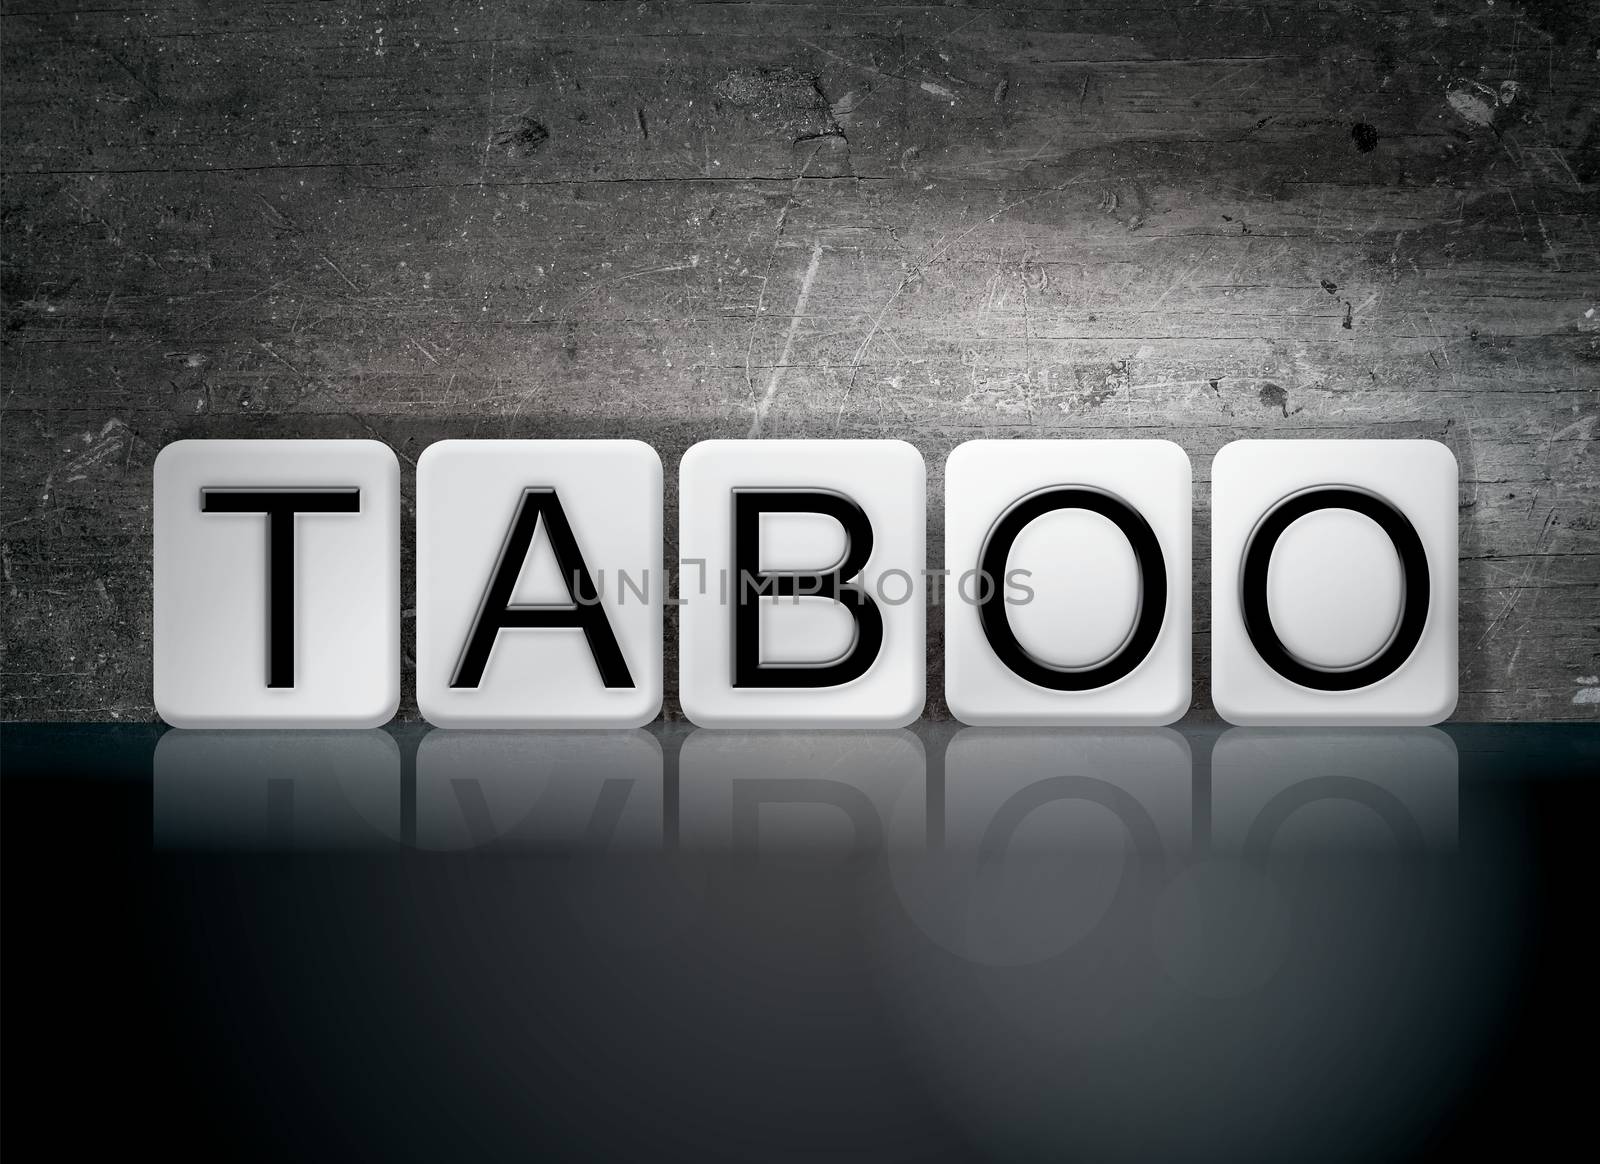 Taboo Tiled Letters Concept and Theme by enterlinedesign